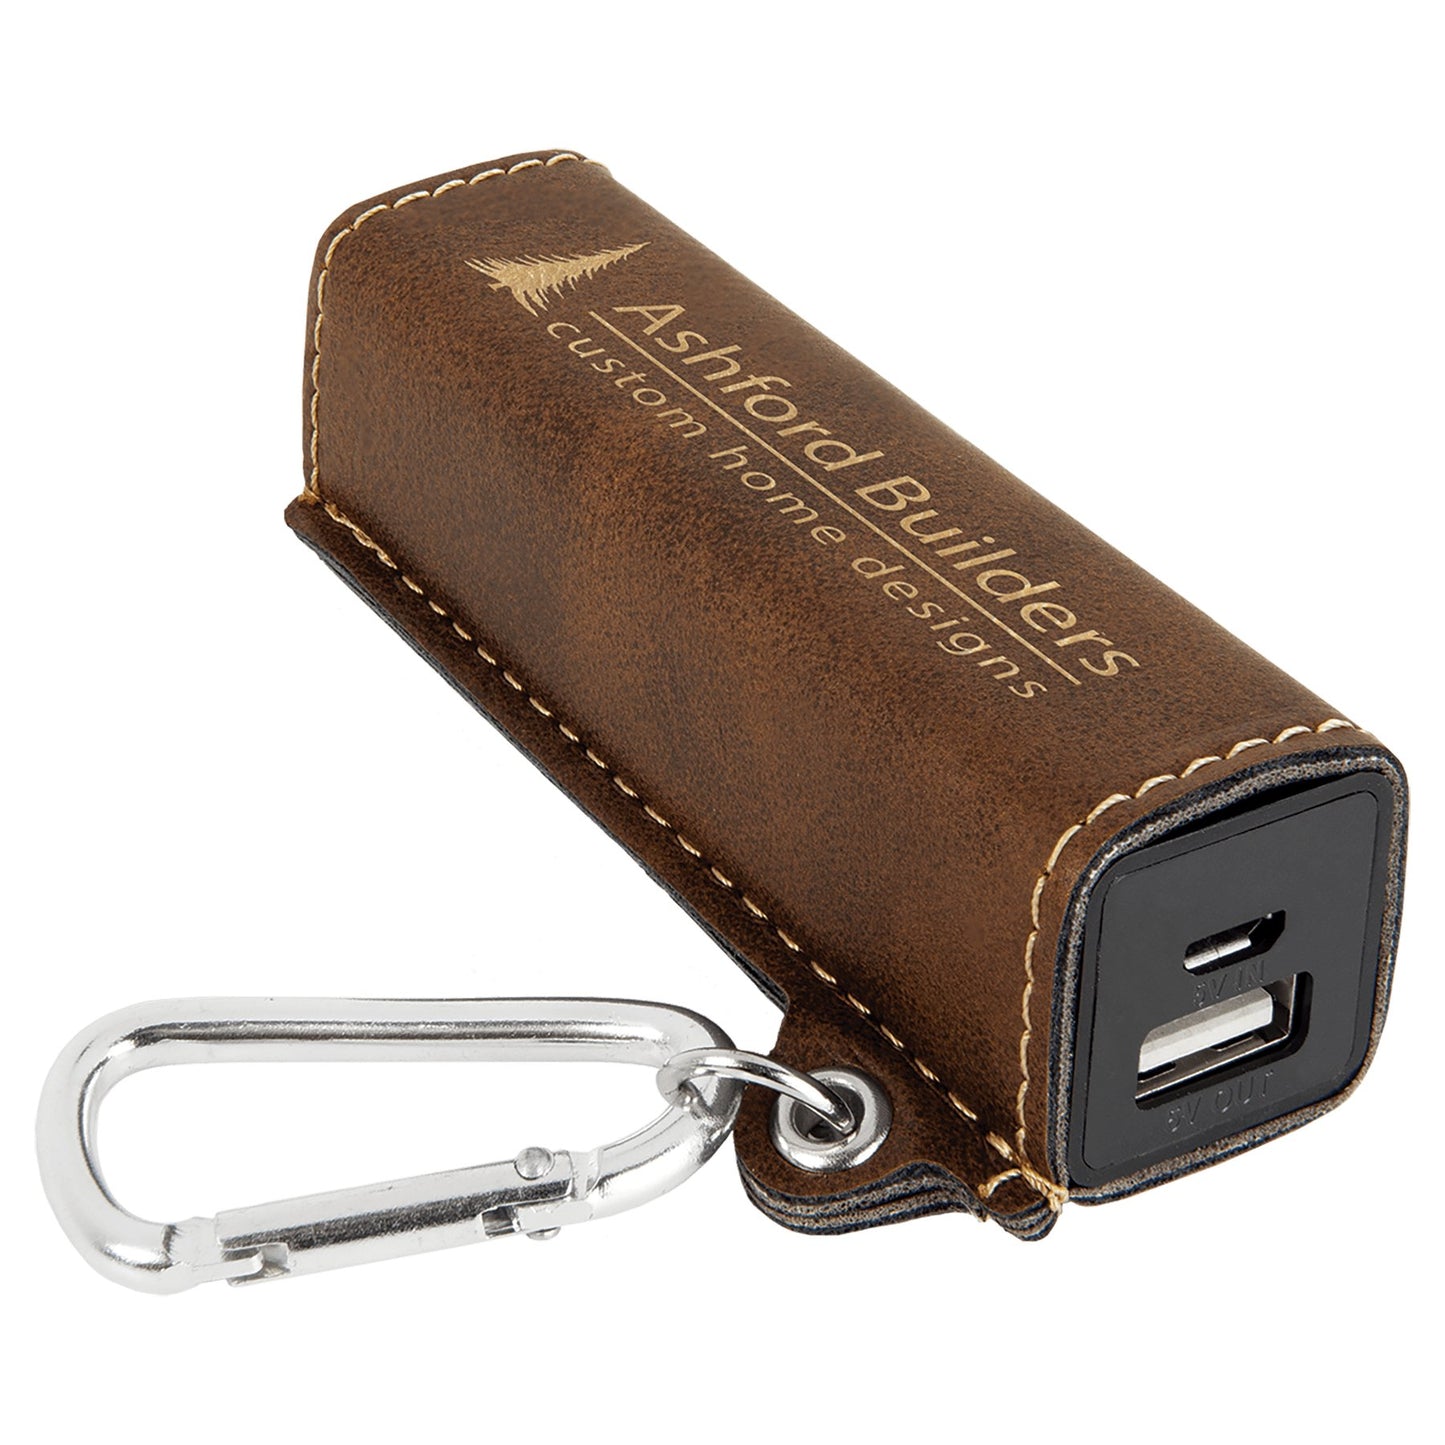 Laserable Leatherette 2200 mAh Power Bank with USB Cord - Legacy Creator IncRustic/Gold